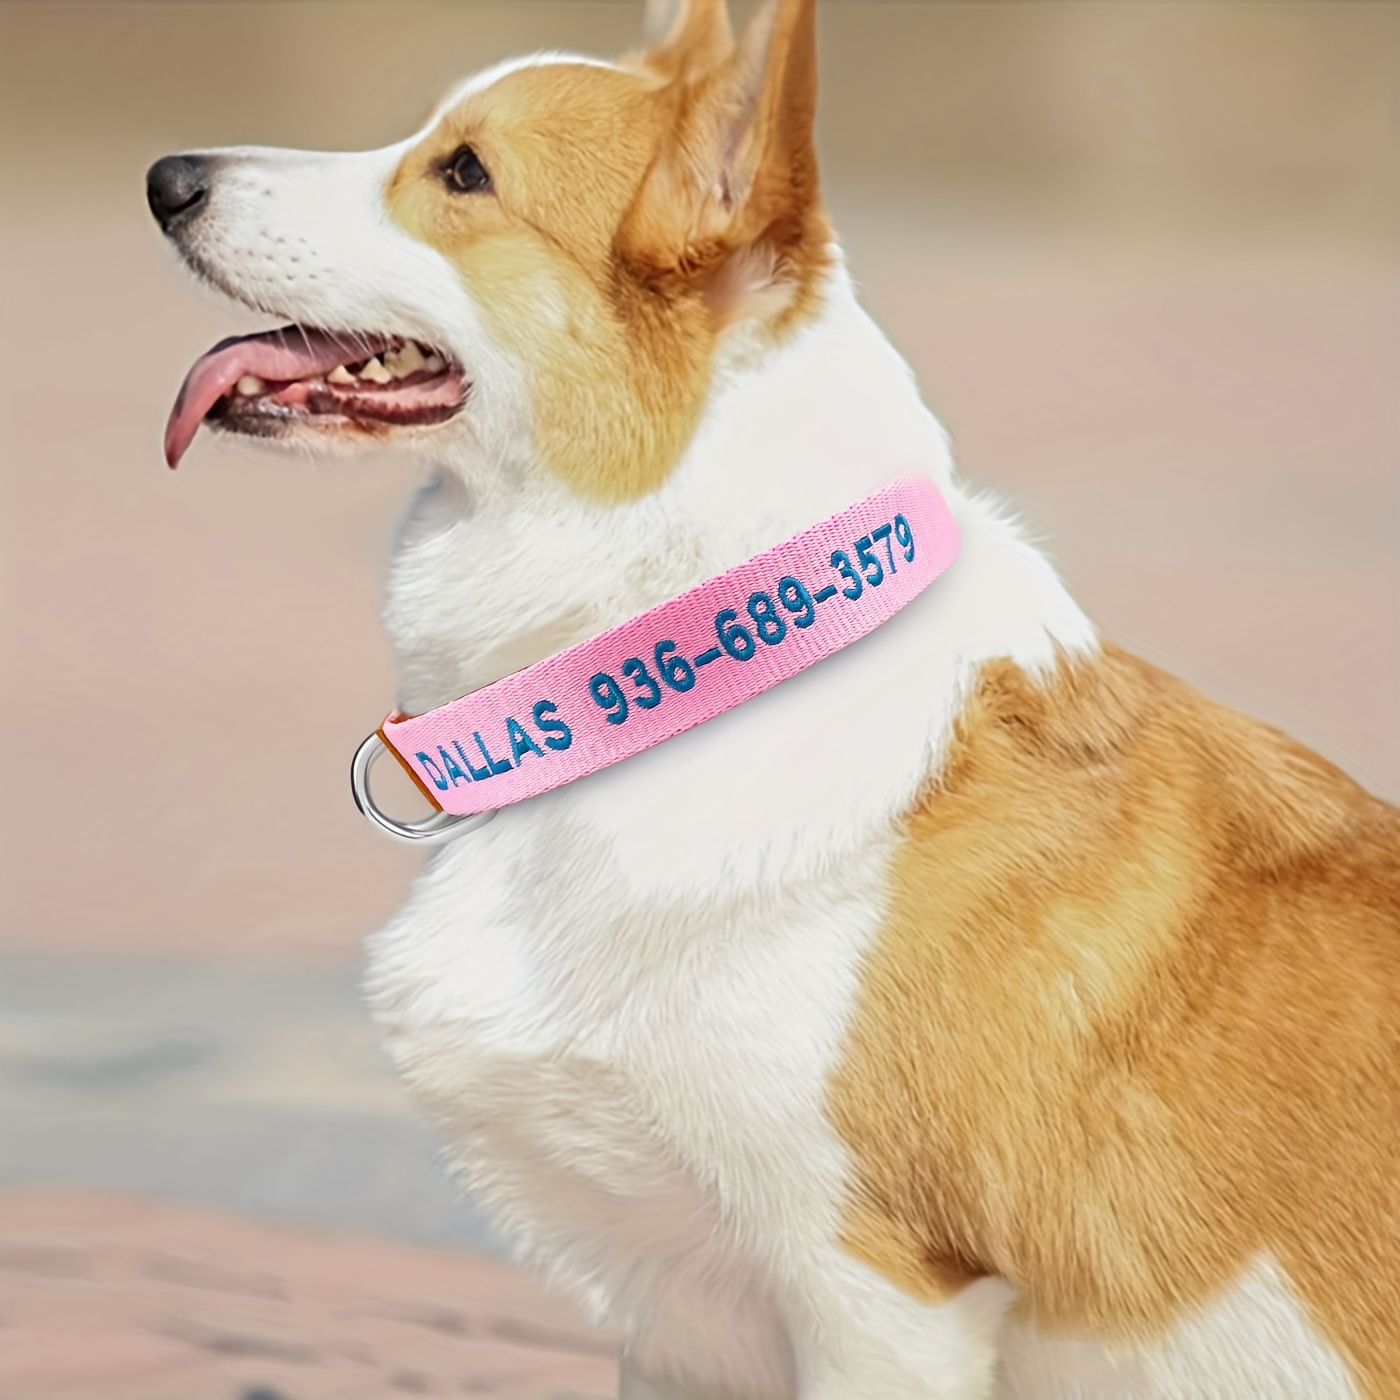 Personalized Dog Collar With Buckle, Pet Dog Collars, Embroidered